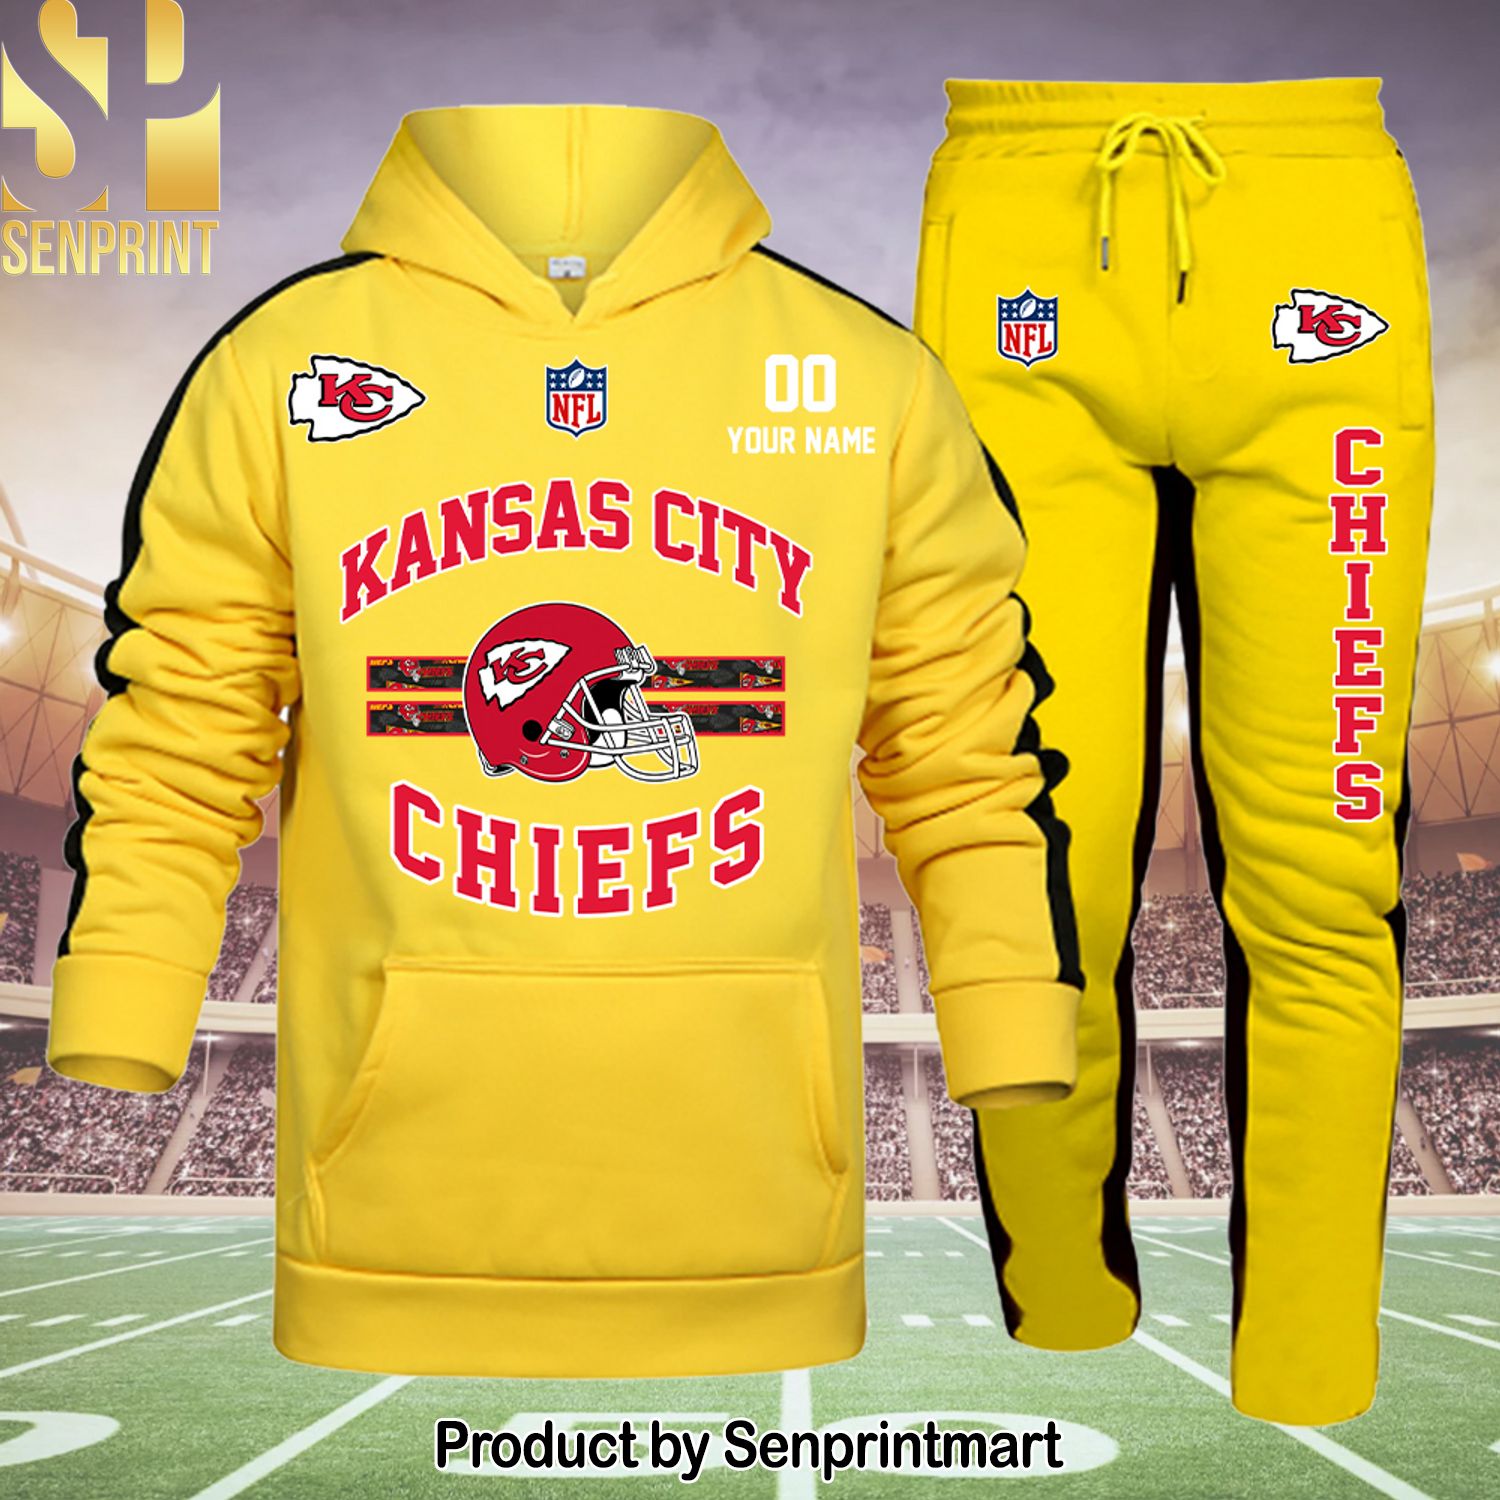 Kansas City Chiefs All Over Printed Unisex Shirt and Pants